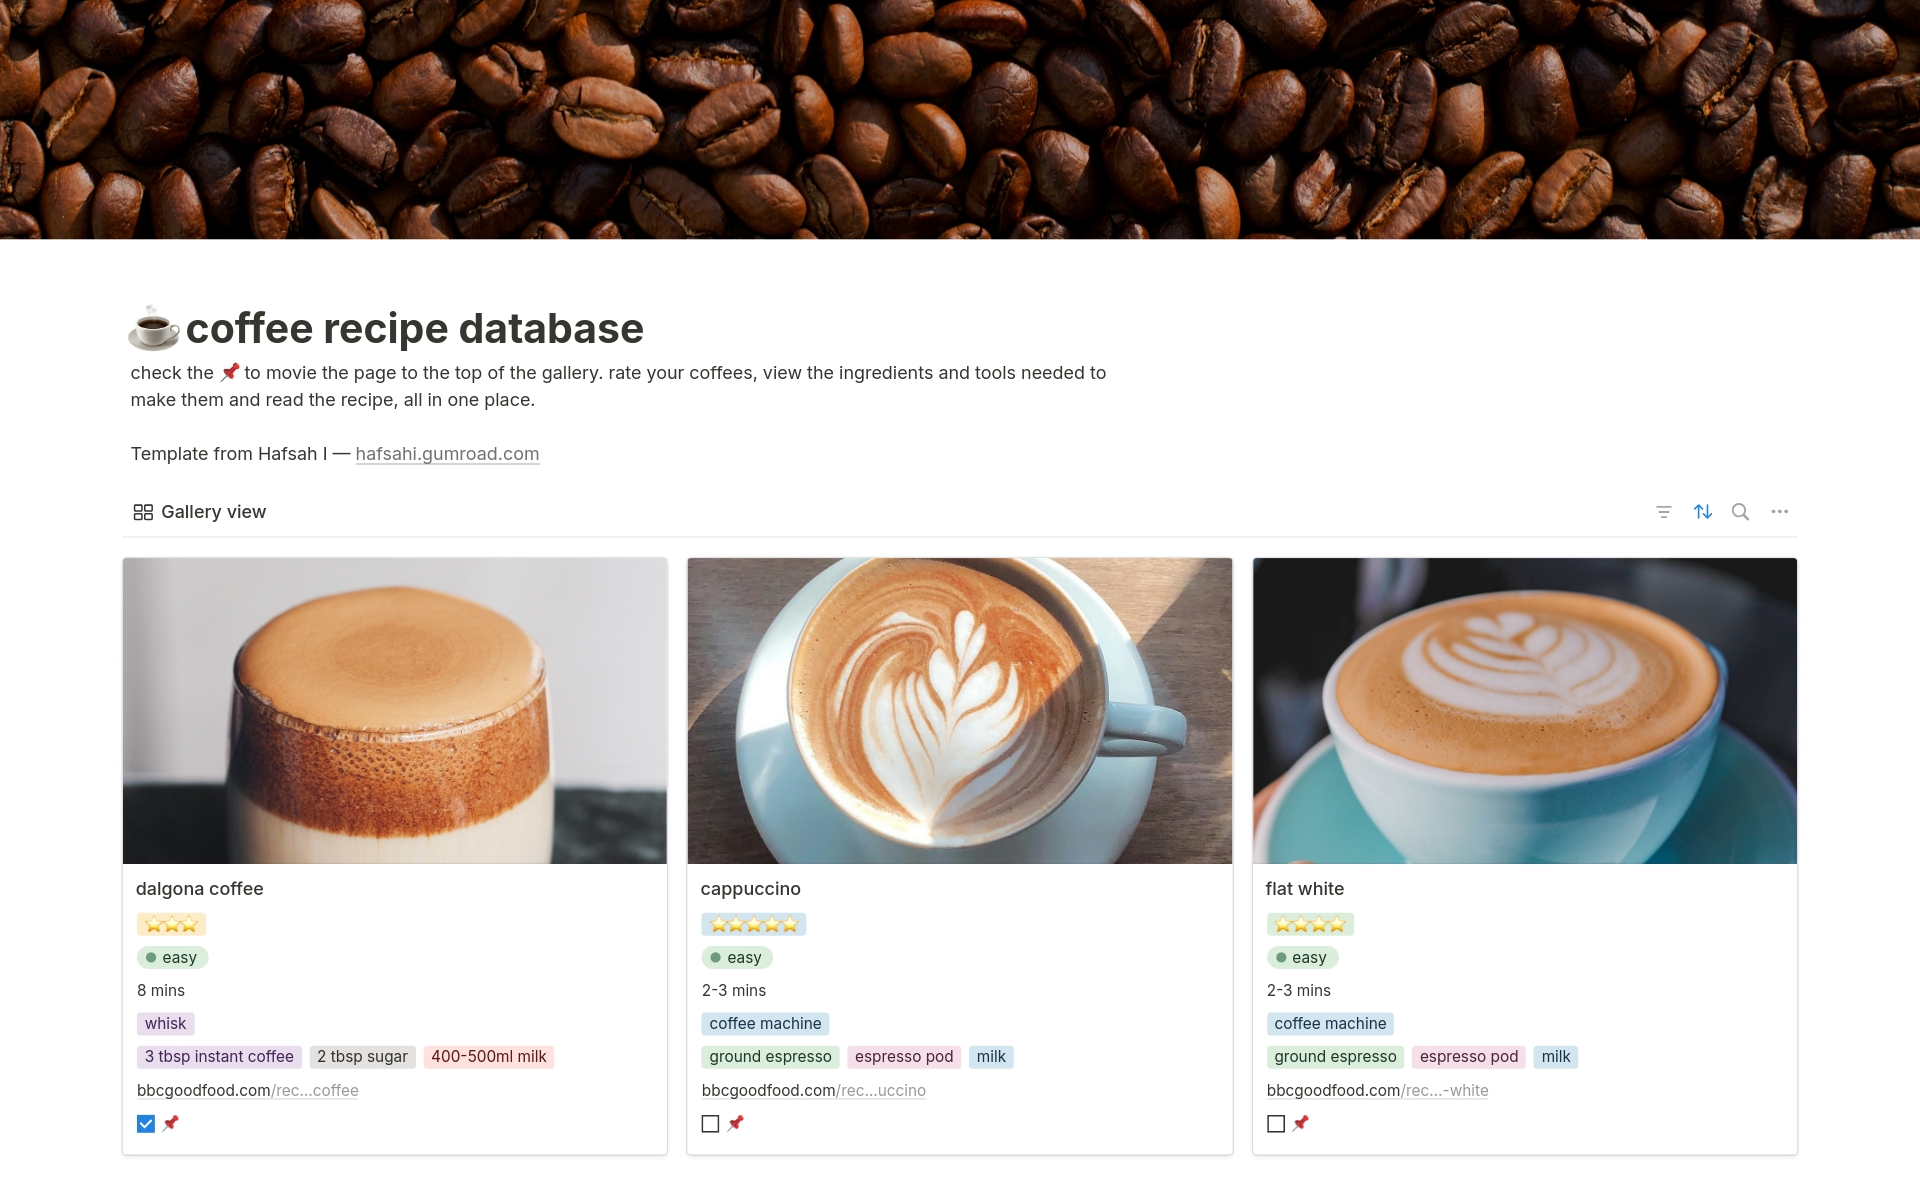 Track all your coffee recipes in one place.